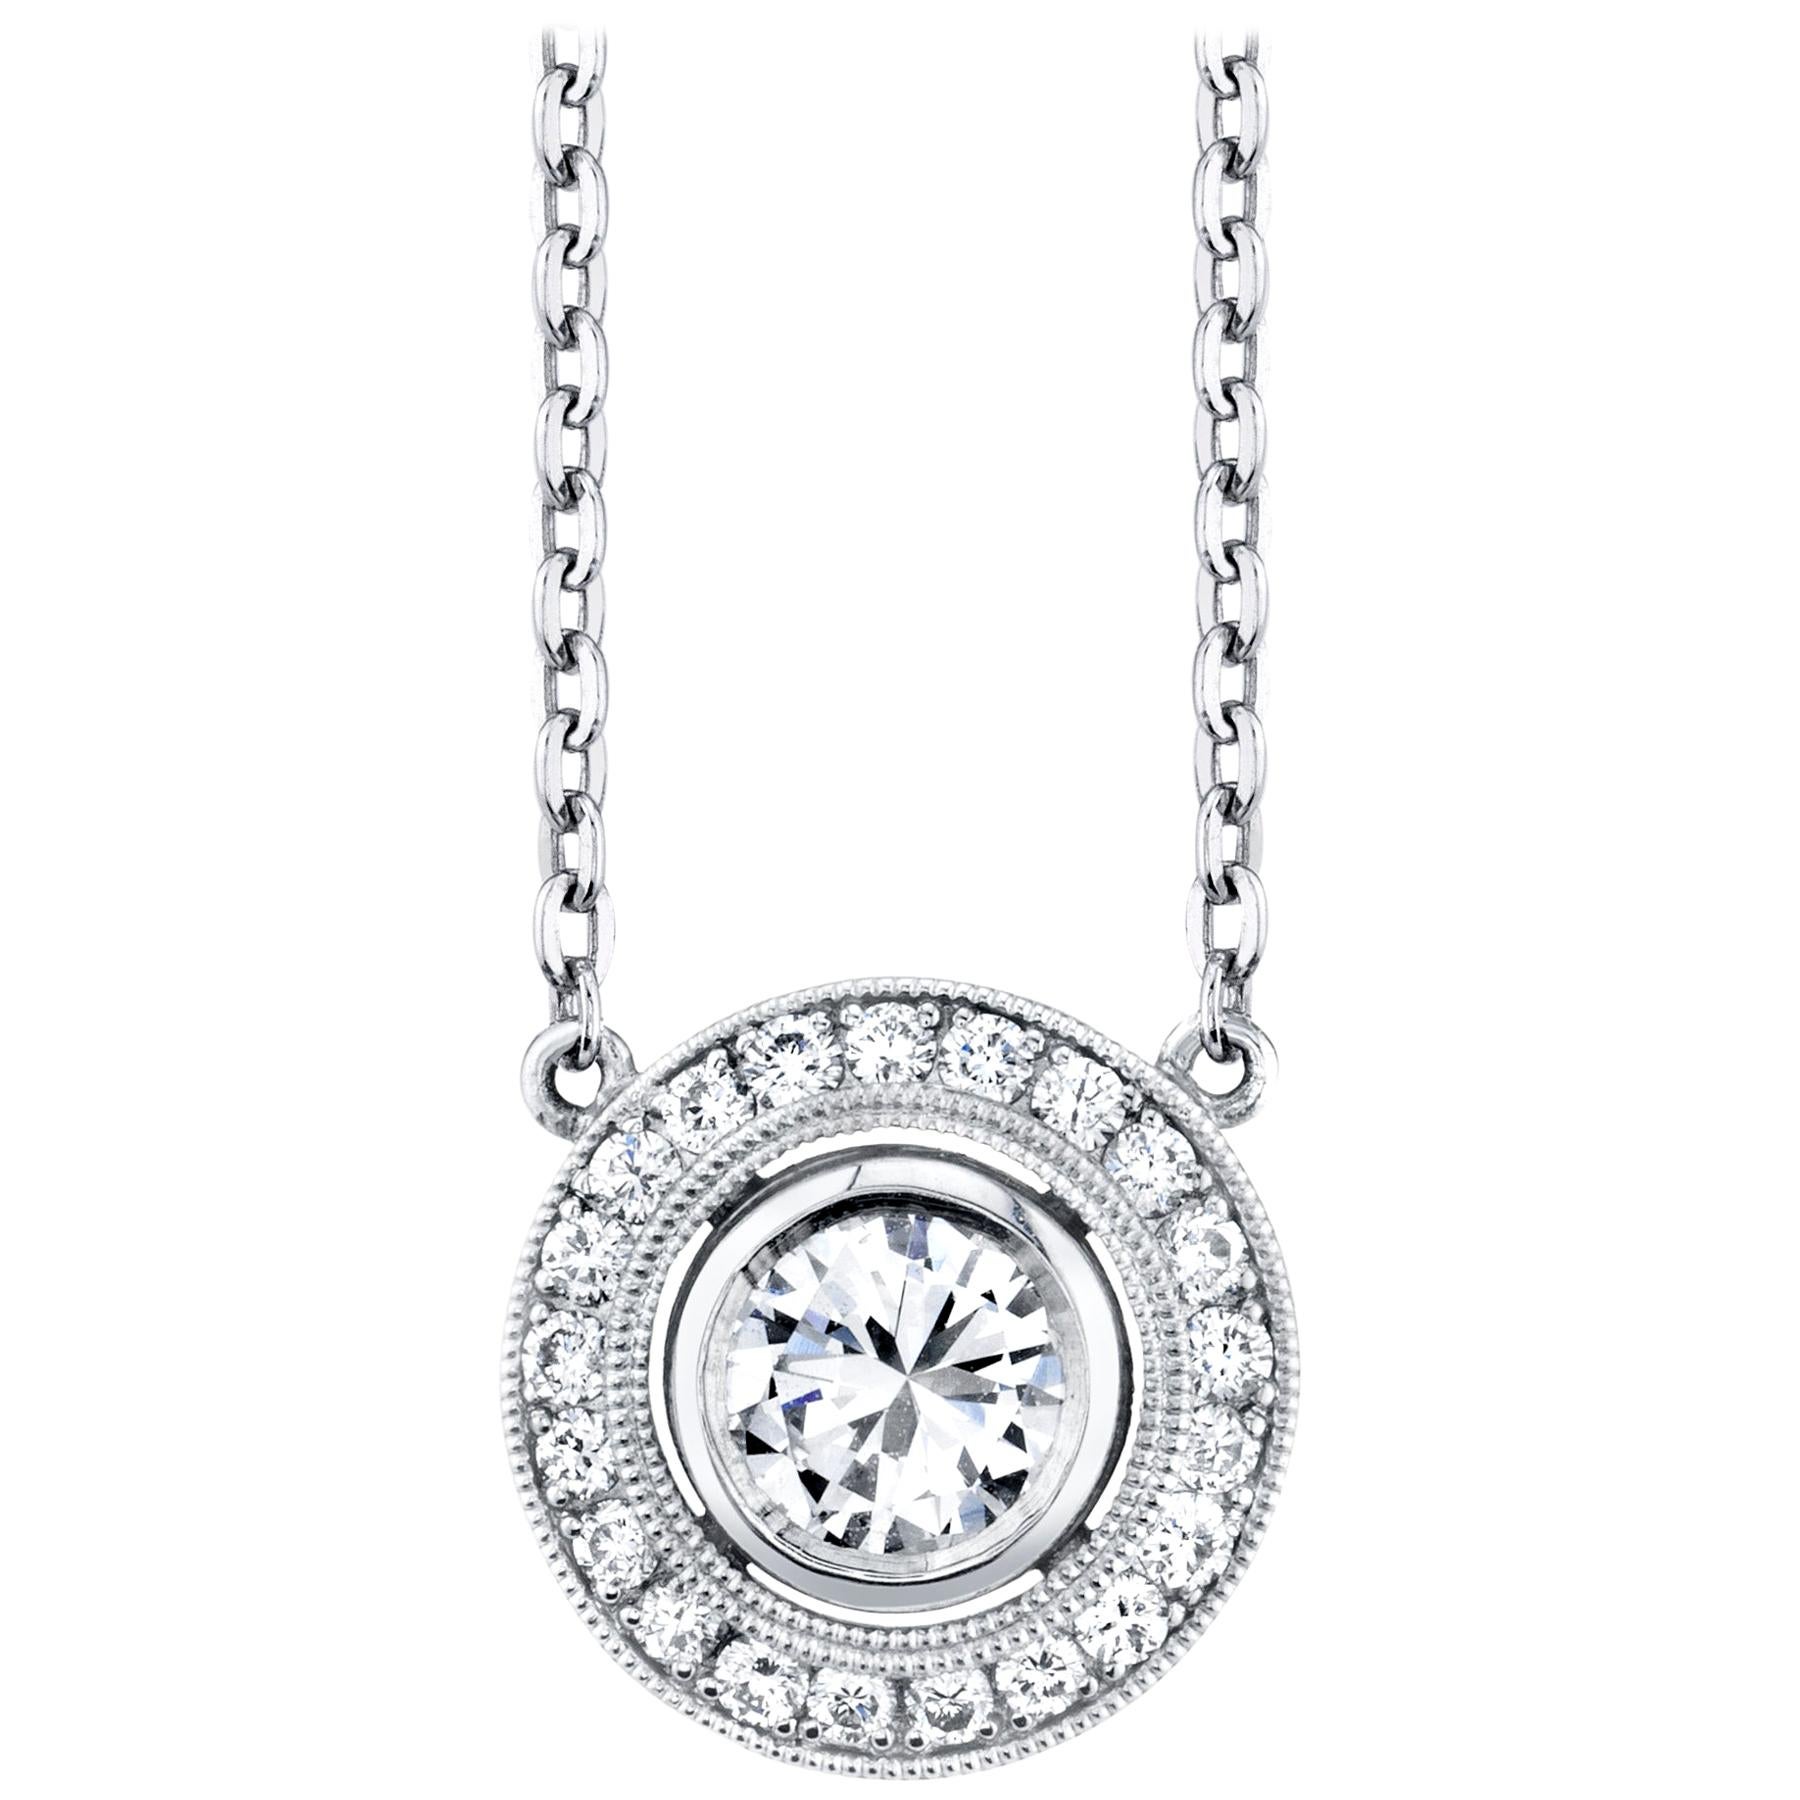 .71 Carat Total Diamond and Diamond Halo Necklace in Platinum, 17 Inches